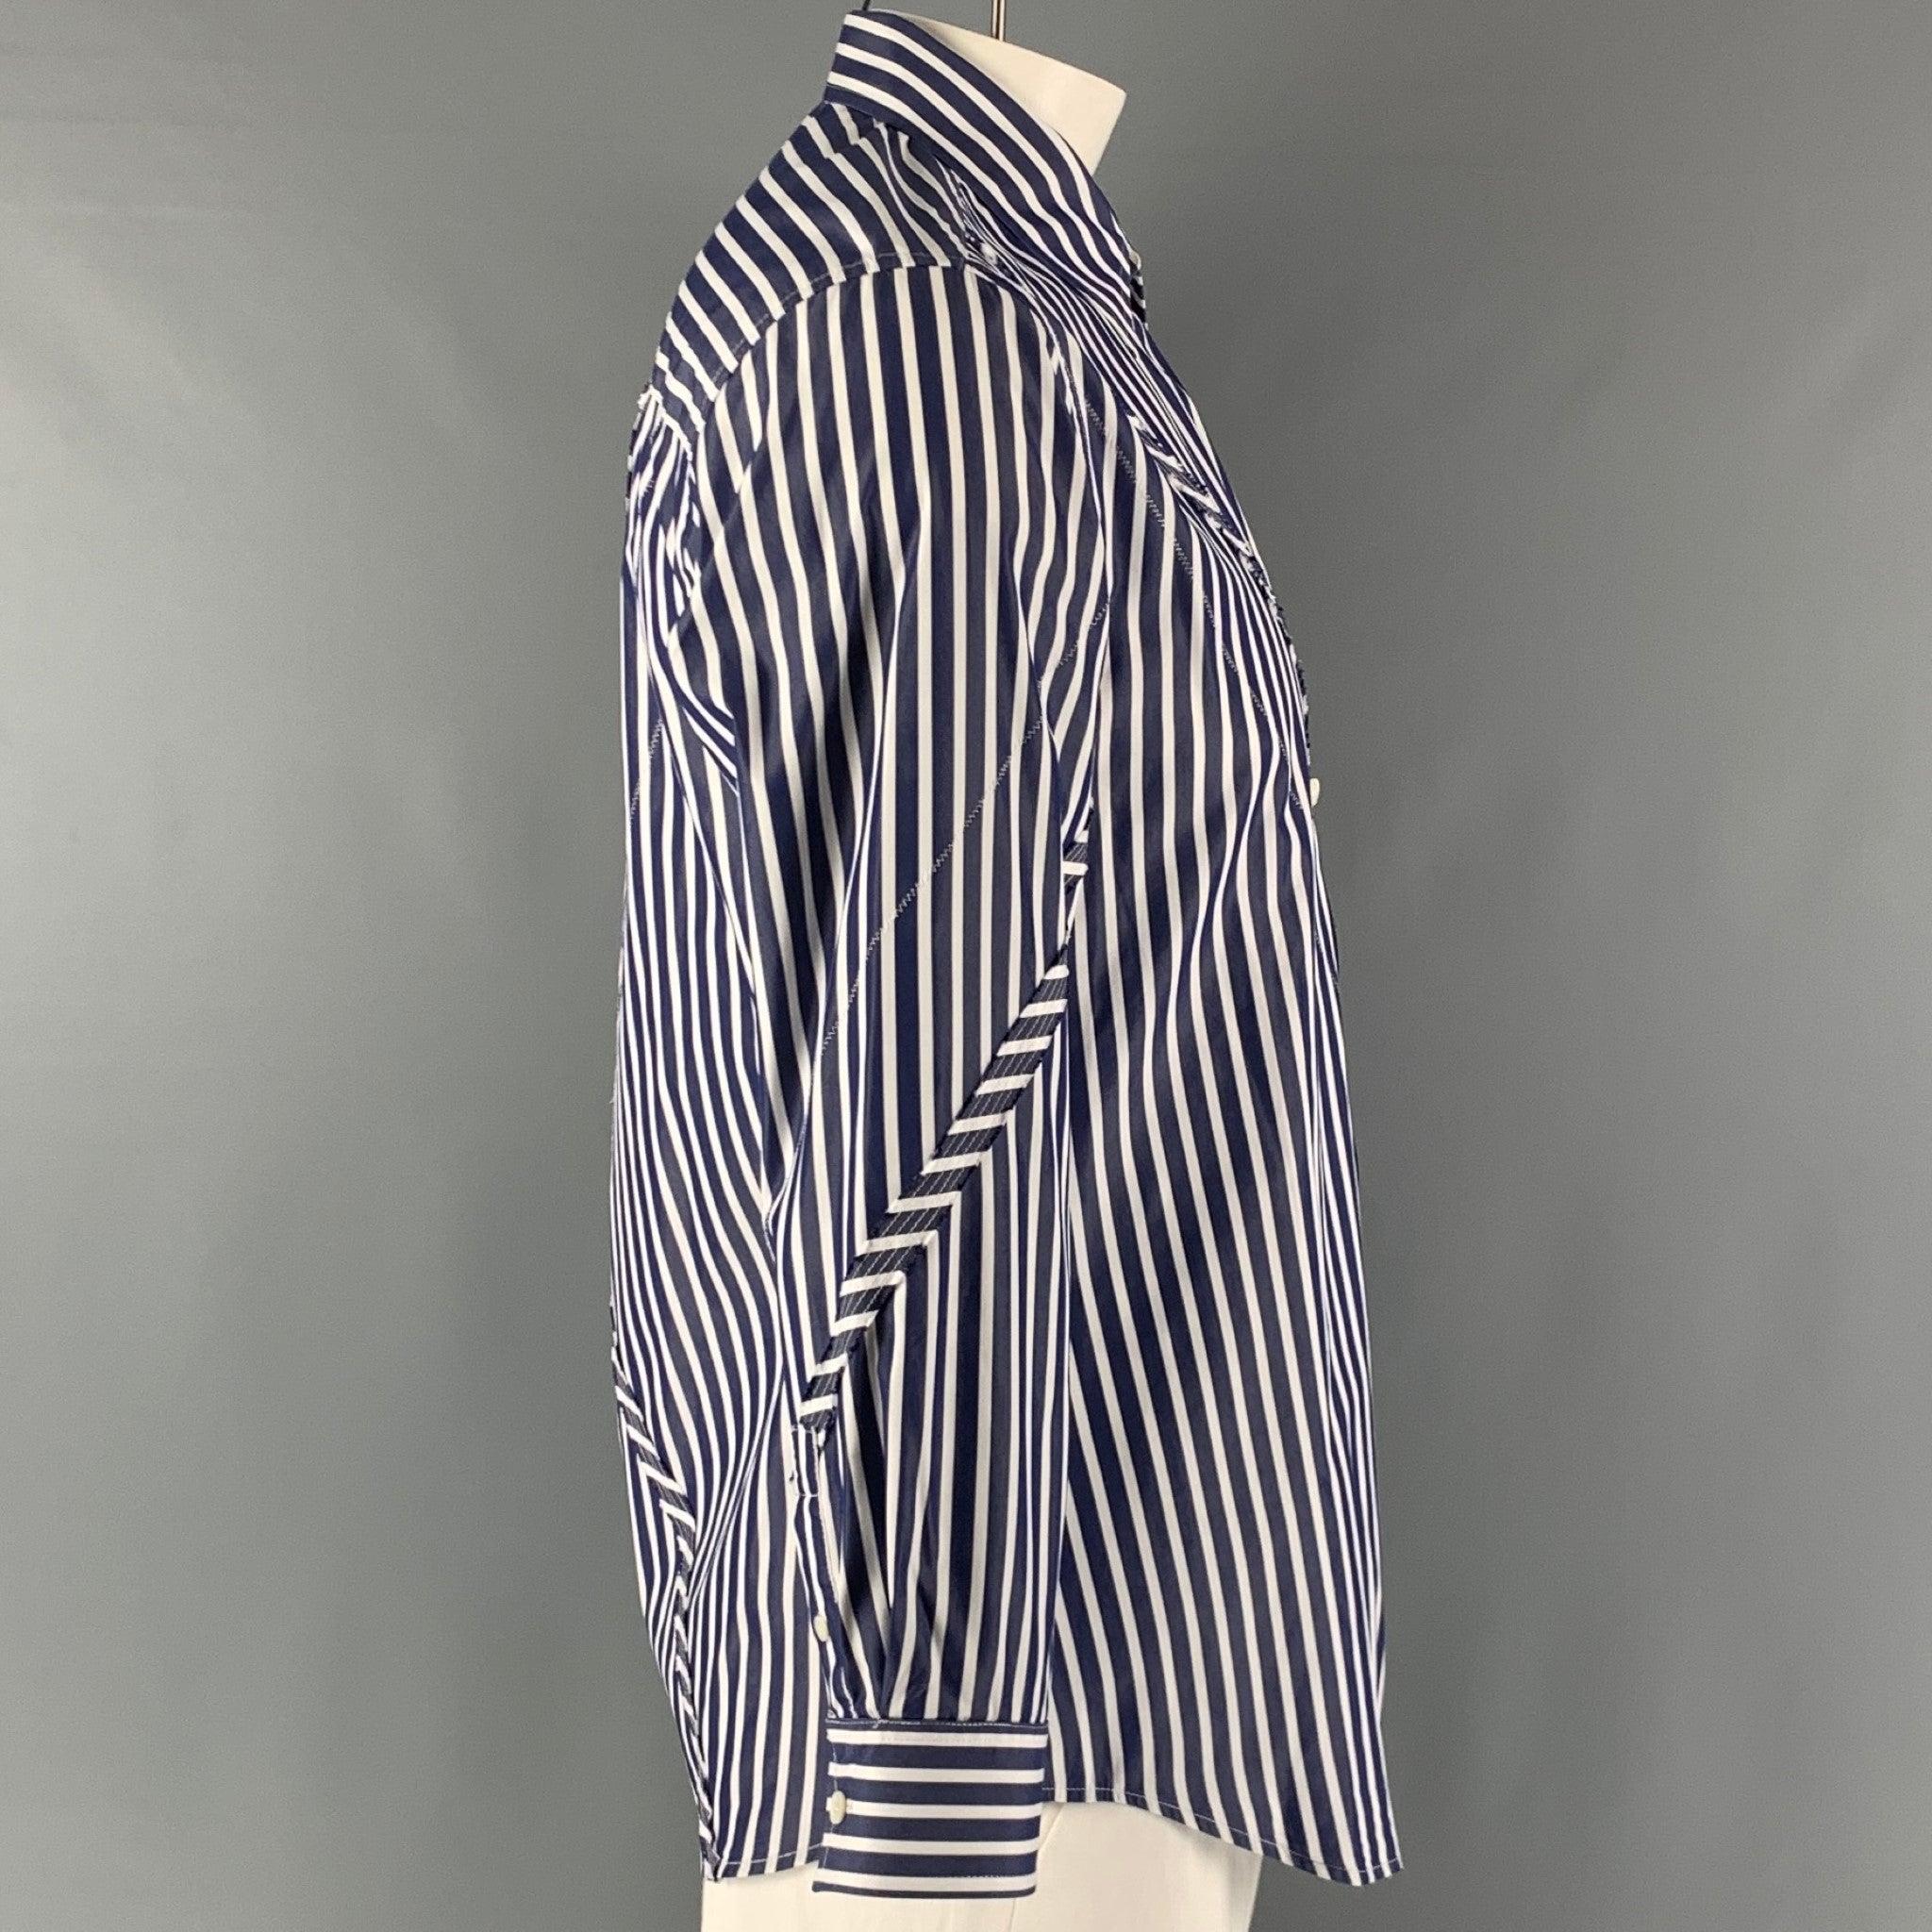 3.1 PHILLIP LIM long sleeve shirt comes in blue and white striped woven material featuring a button up style, contrast top stitching details, and a straight collar. Excellent Pre-Owned Condition. 

Marked:   L 

Measurements: 
 
Shoulder: 18 inches